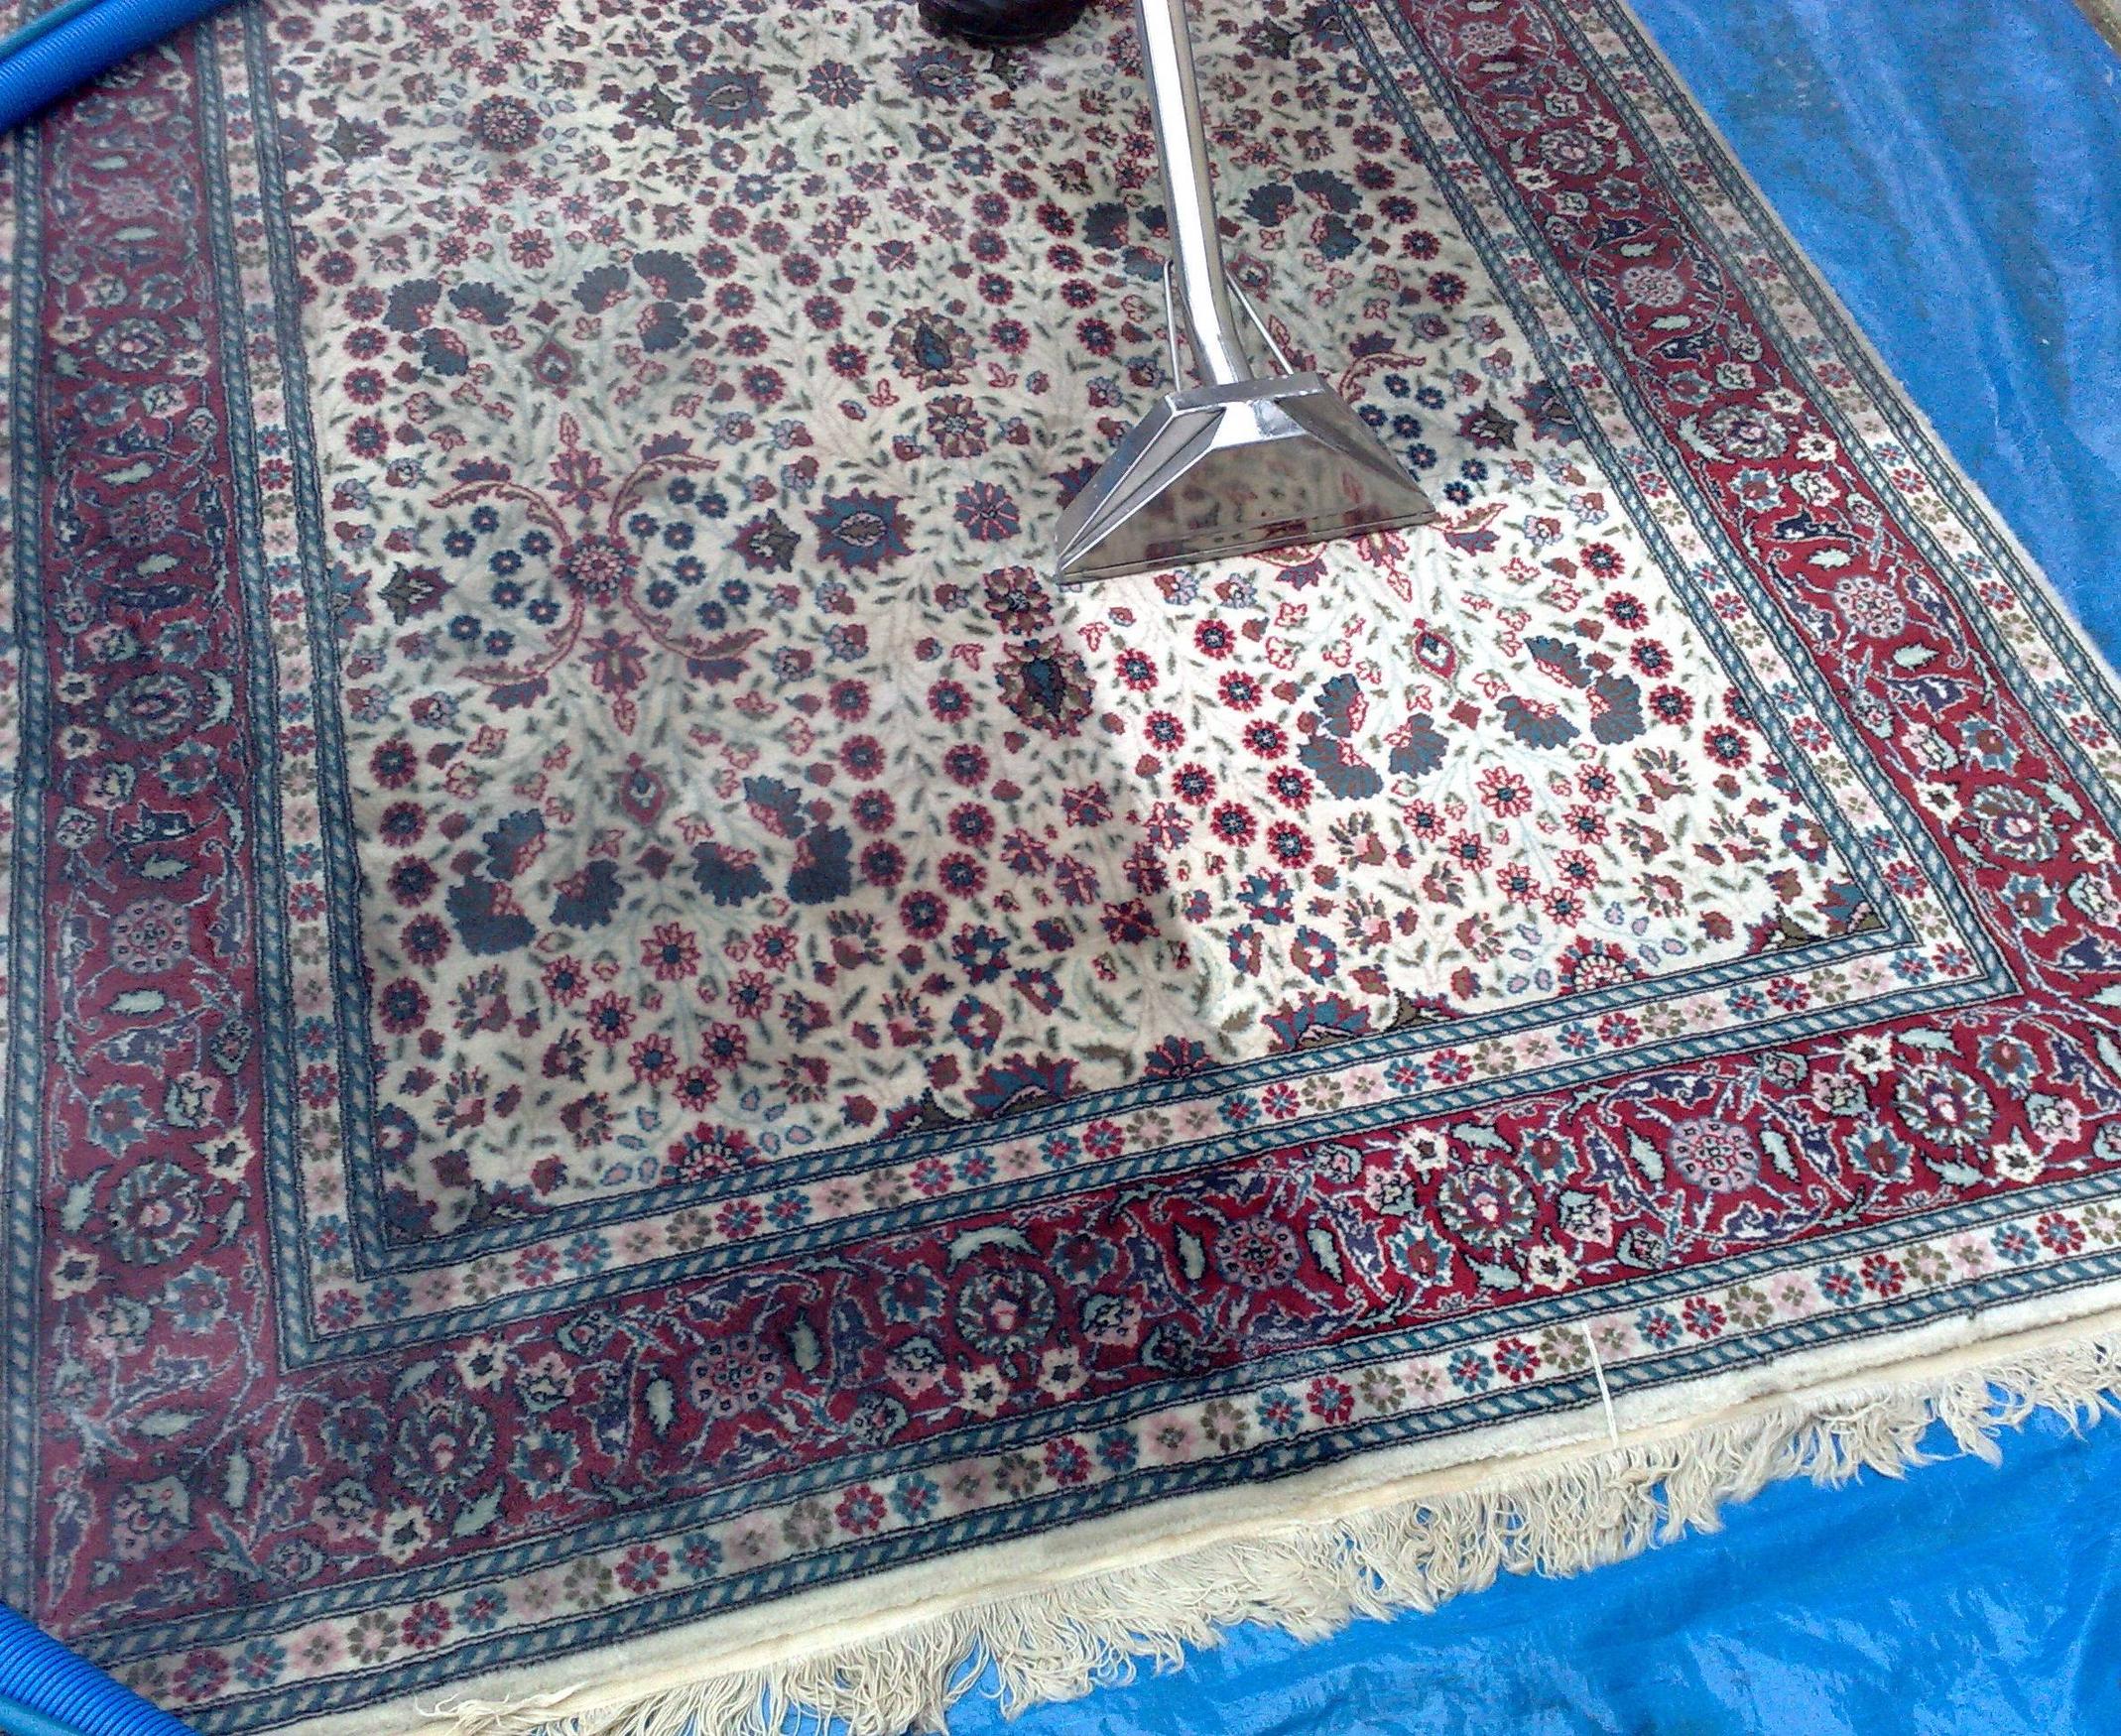 Rug Cleaning is Essential If You Have a Rug That Gets Dirty Quickly